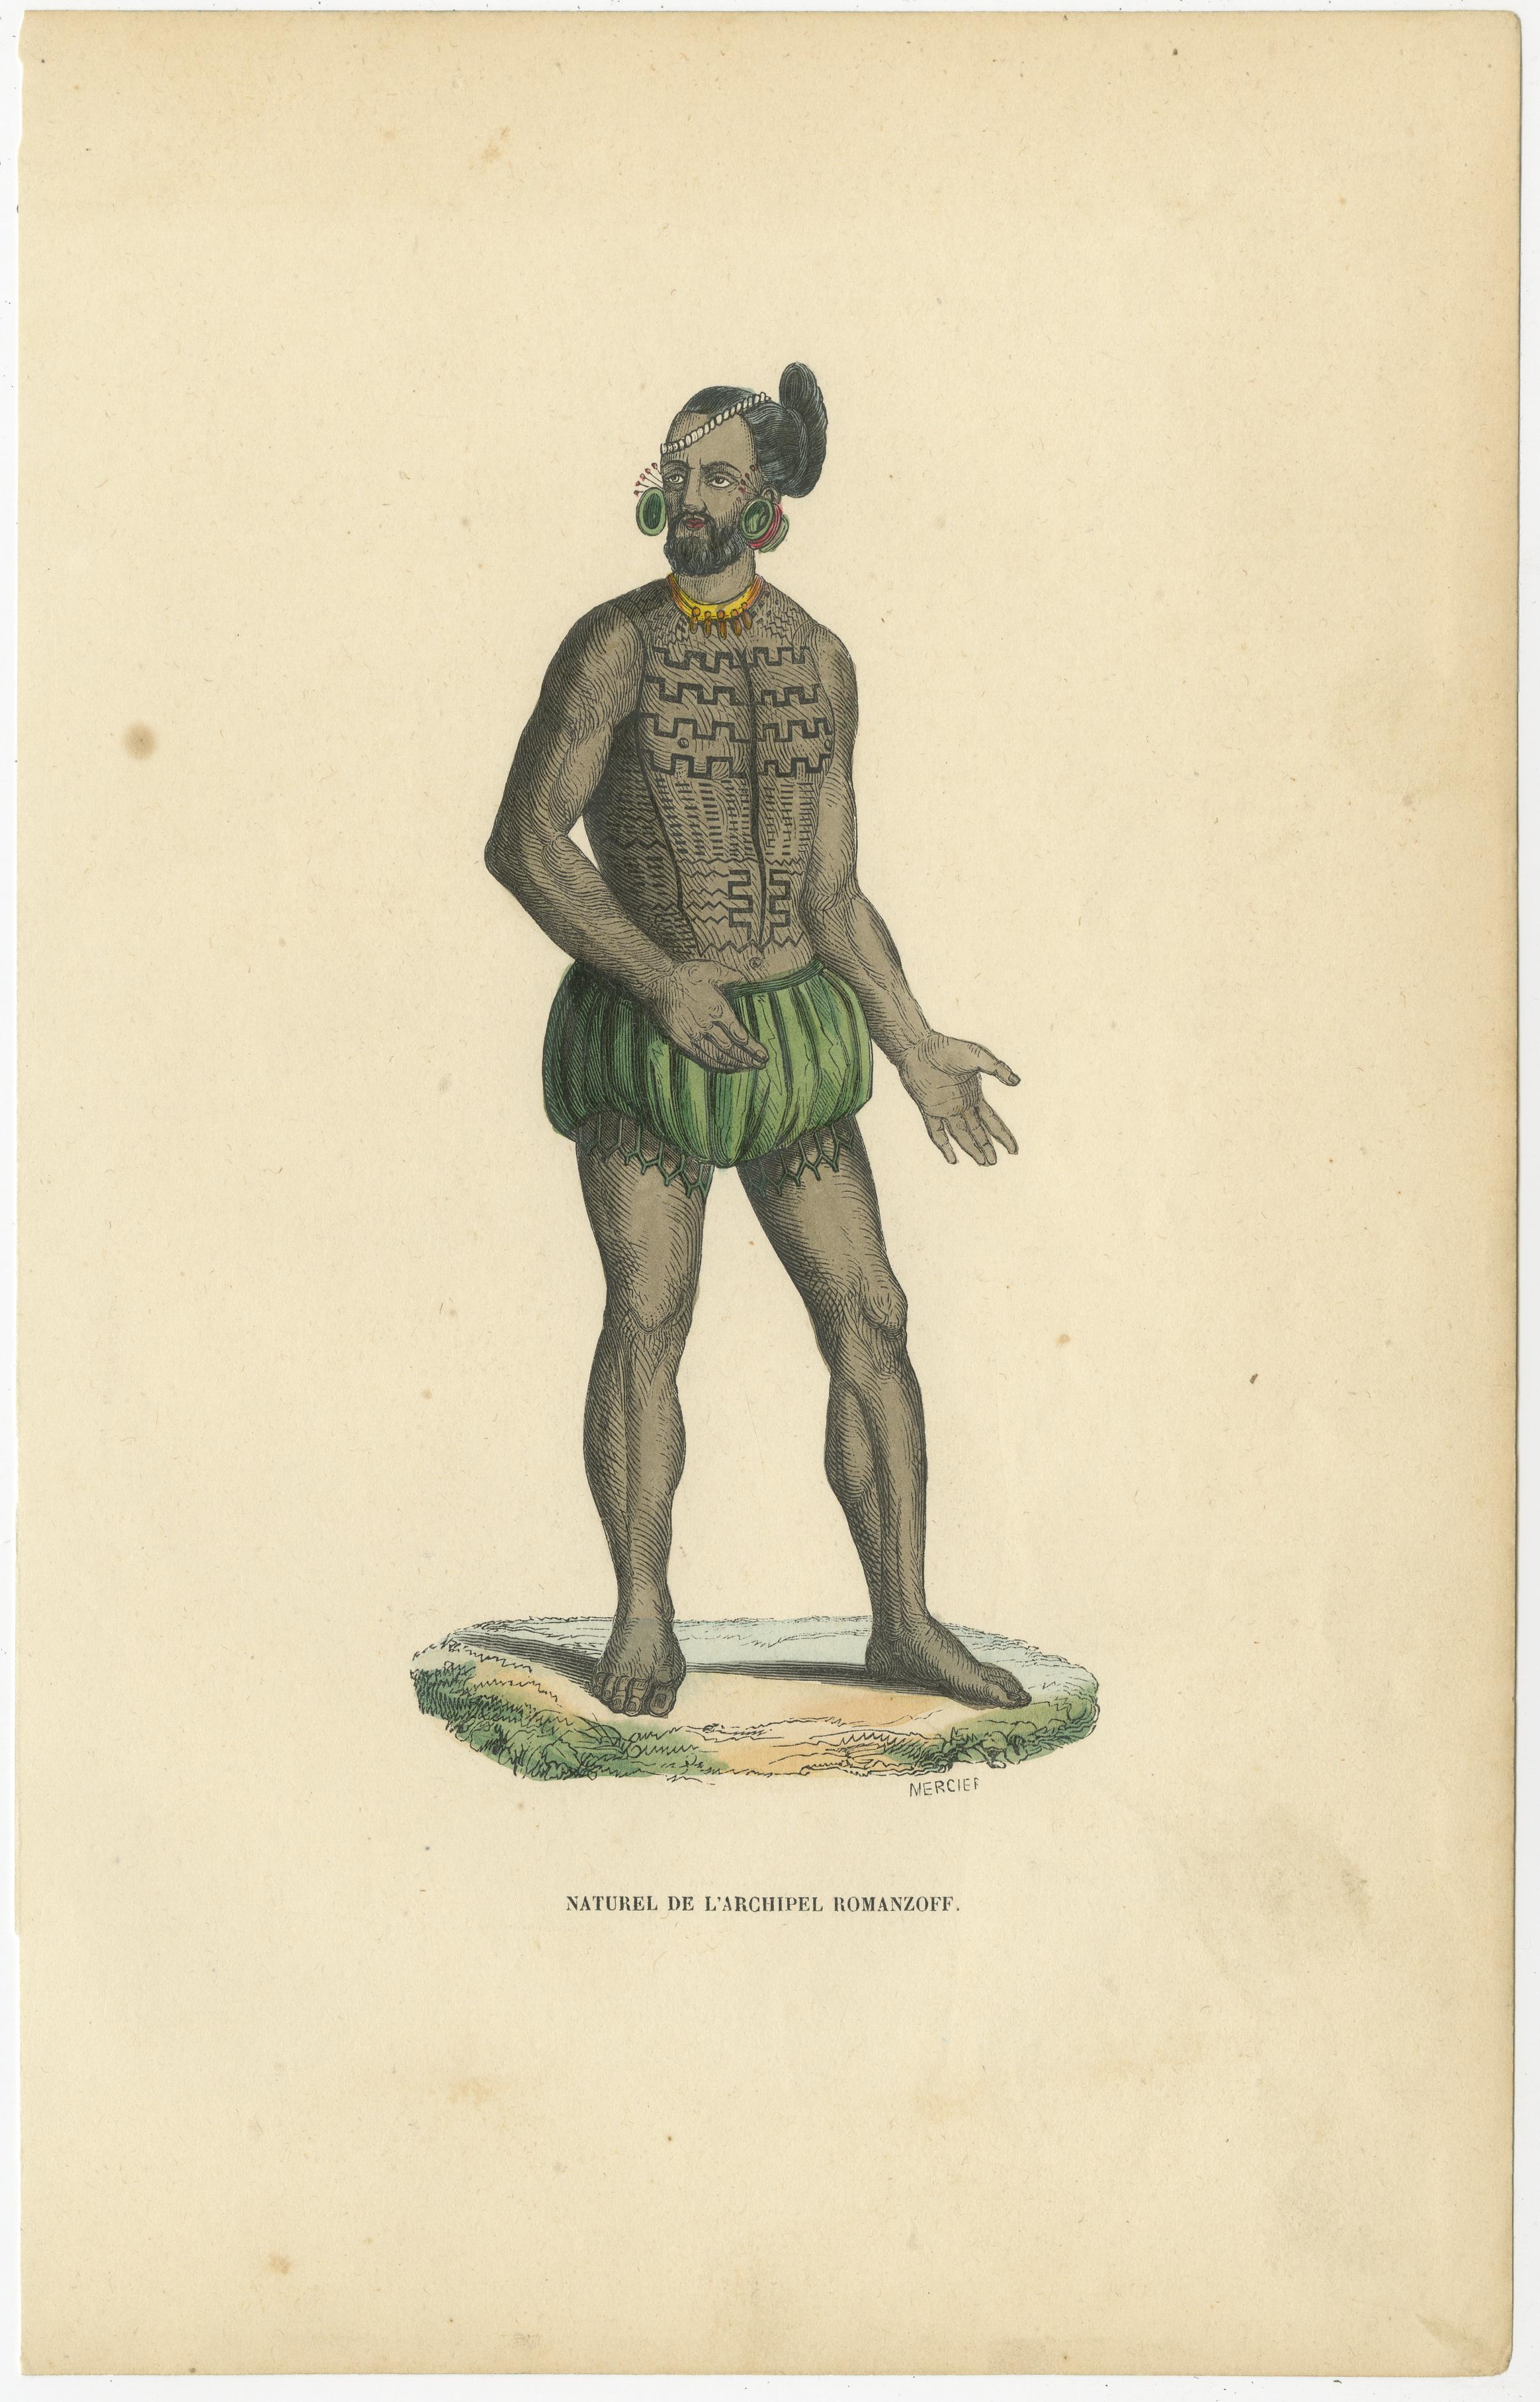 Antique print titled 'Naturel de l'Archipel Romanzoff'. Hand colored woodcut of a native man of Tikei Island, Tuamotu group, French Polynesia. Wearing a grass skirt, rolled green-leaf ear plugs, necklace, and headdress. His body decorated with